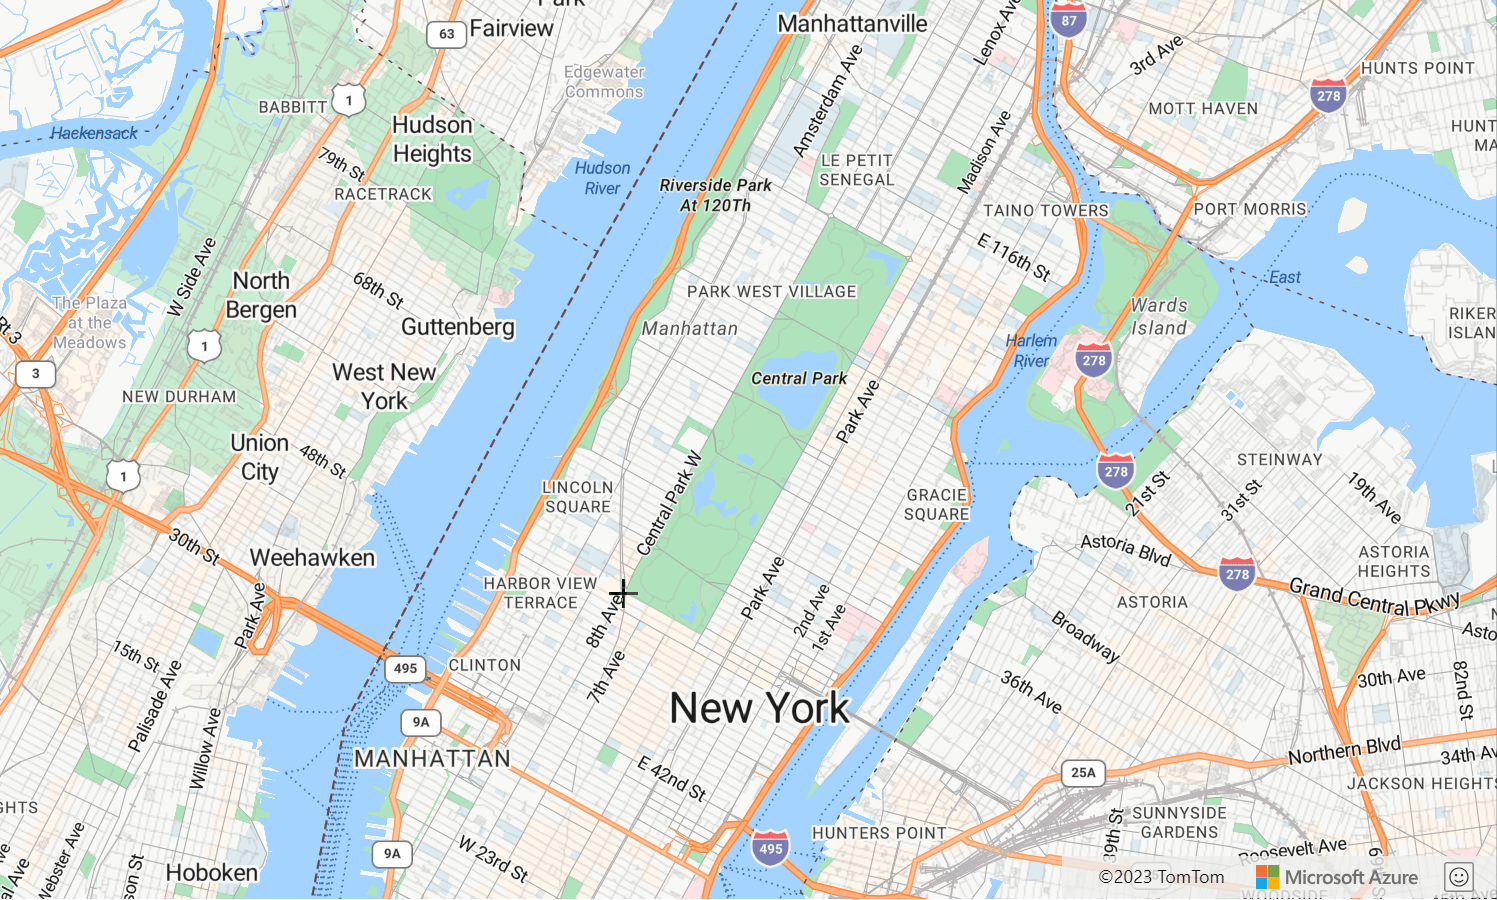 A screenshot of a map showing central park in New York City where the drawing manager is demonstrated by drawing line.